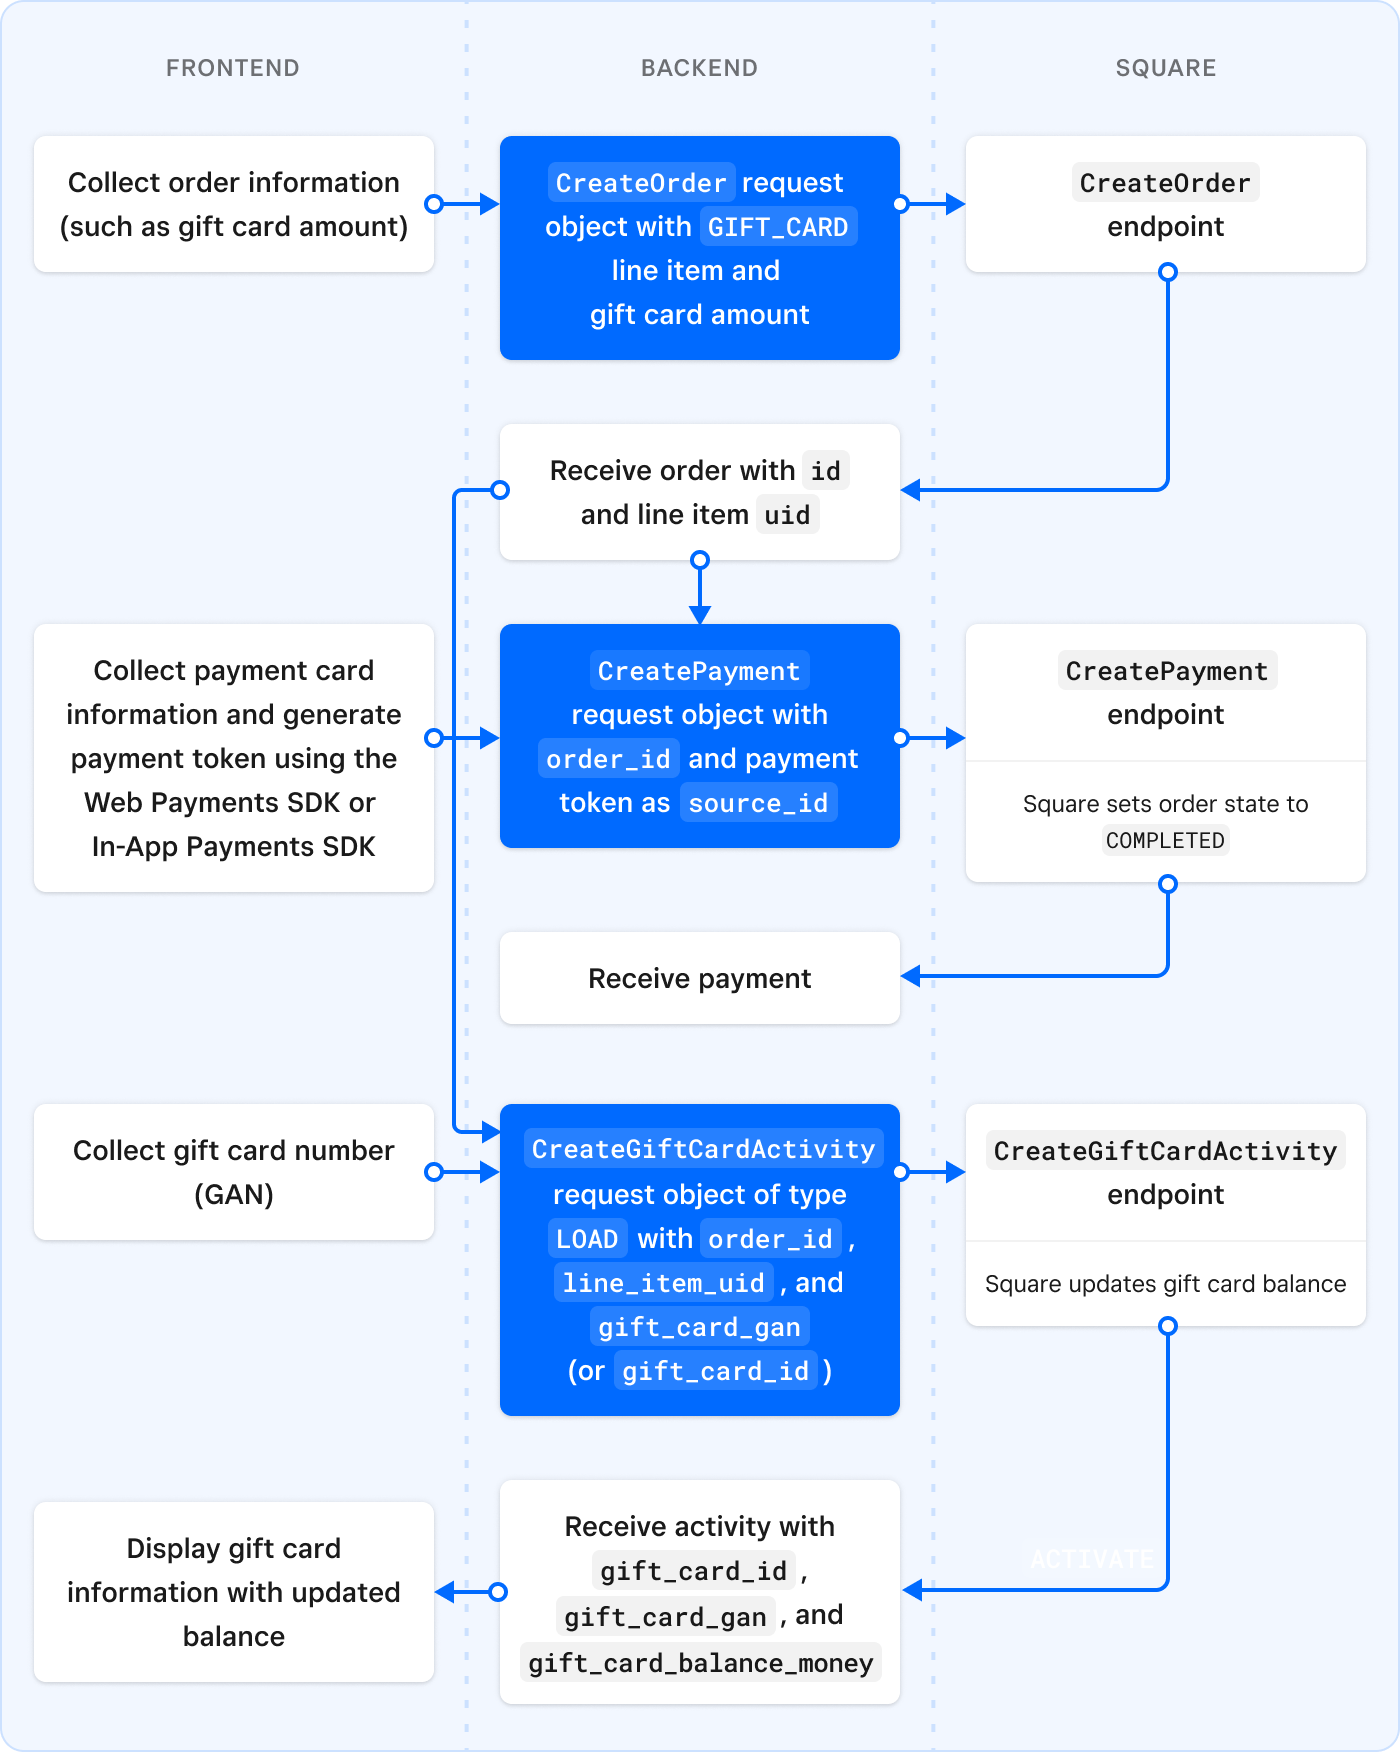 A diagram showing the typical process flow for the frontend client, backend server, and Square when reloading a gift card using Orders API and Payments API integration. 